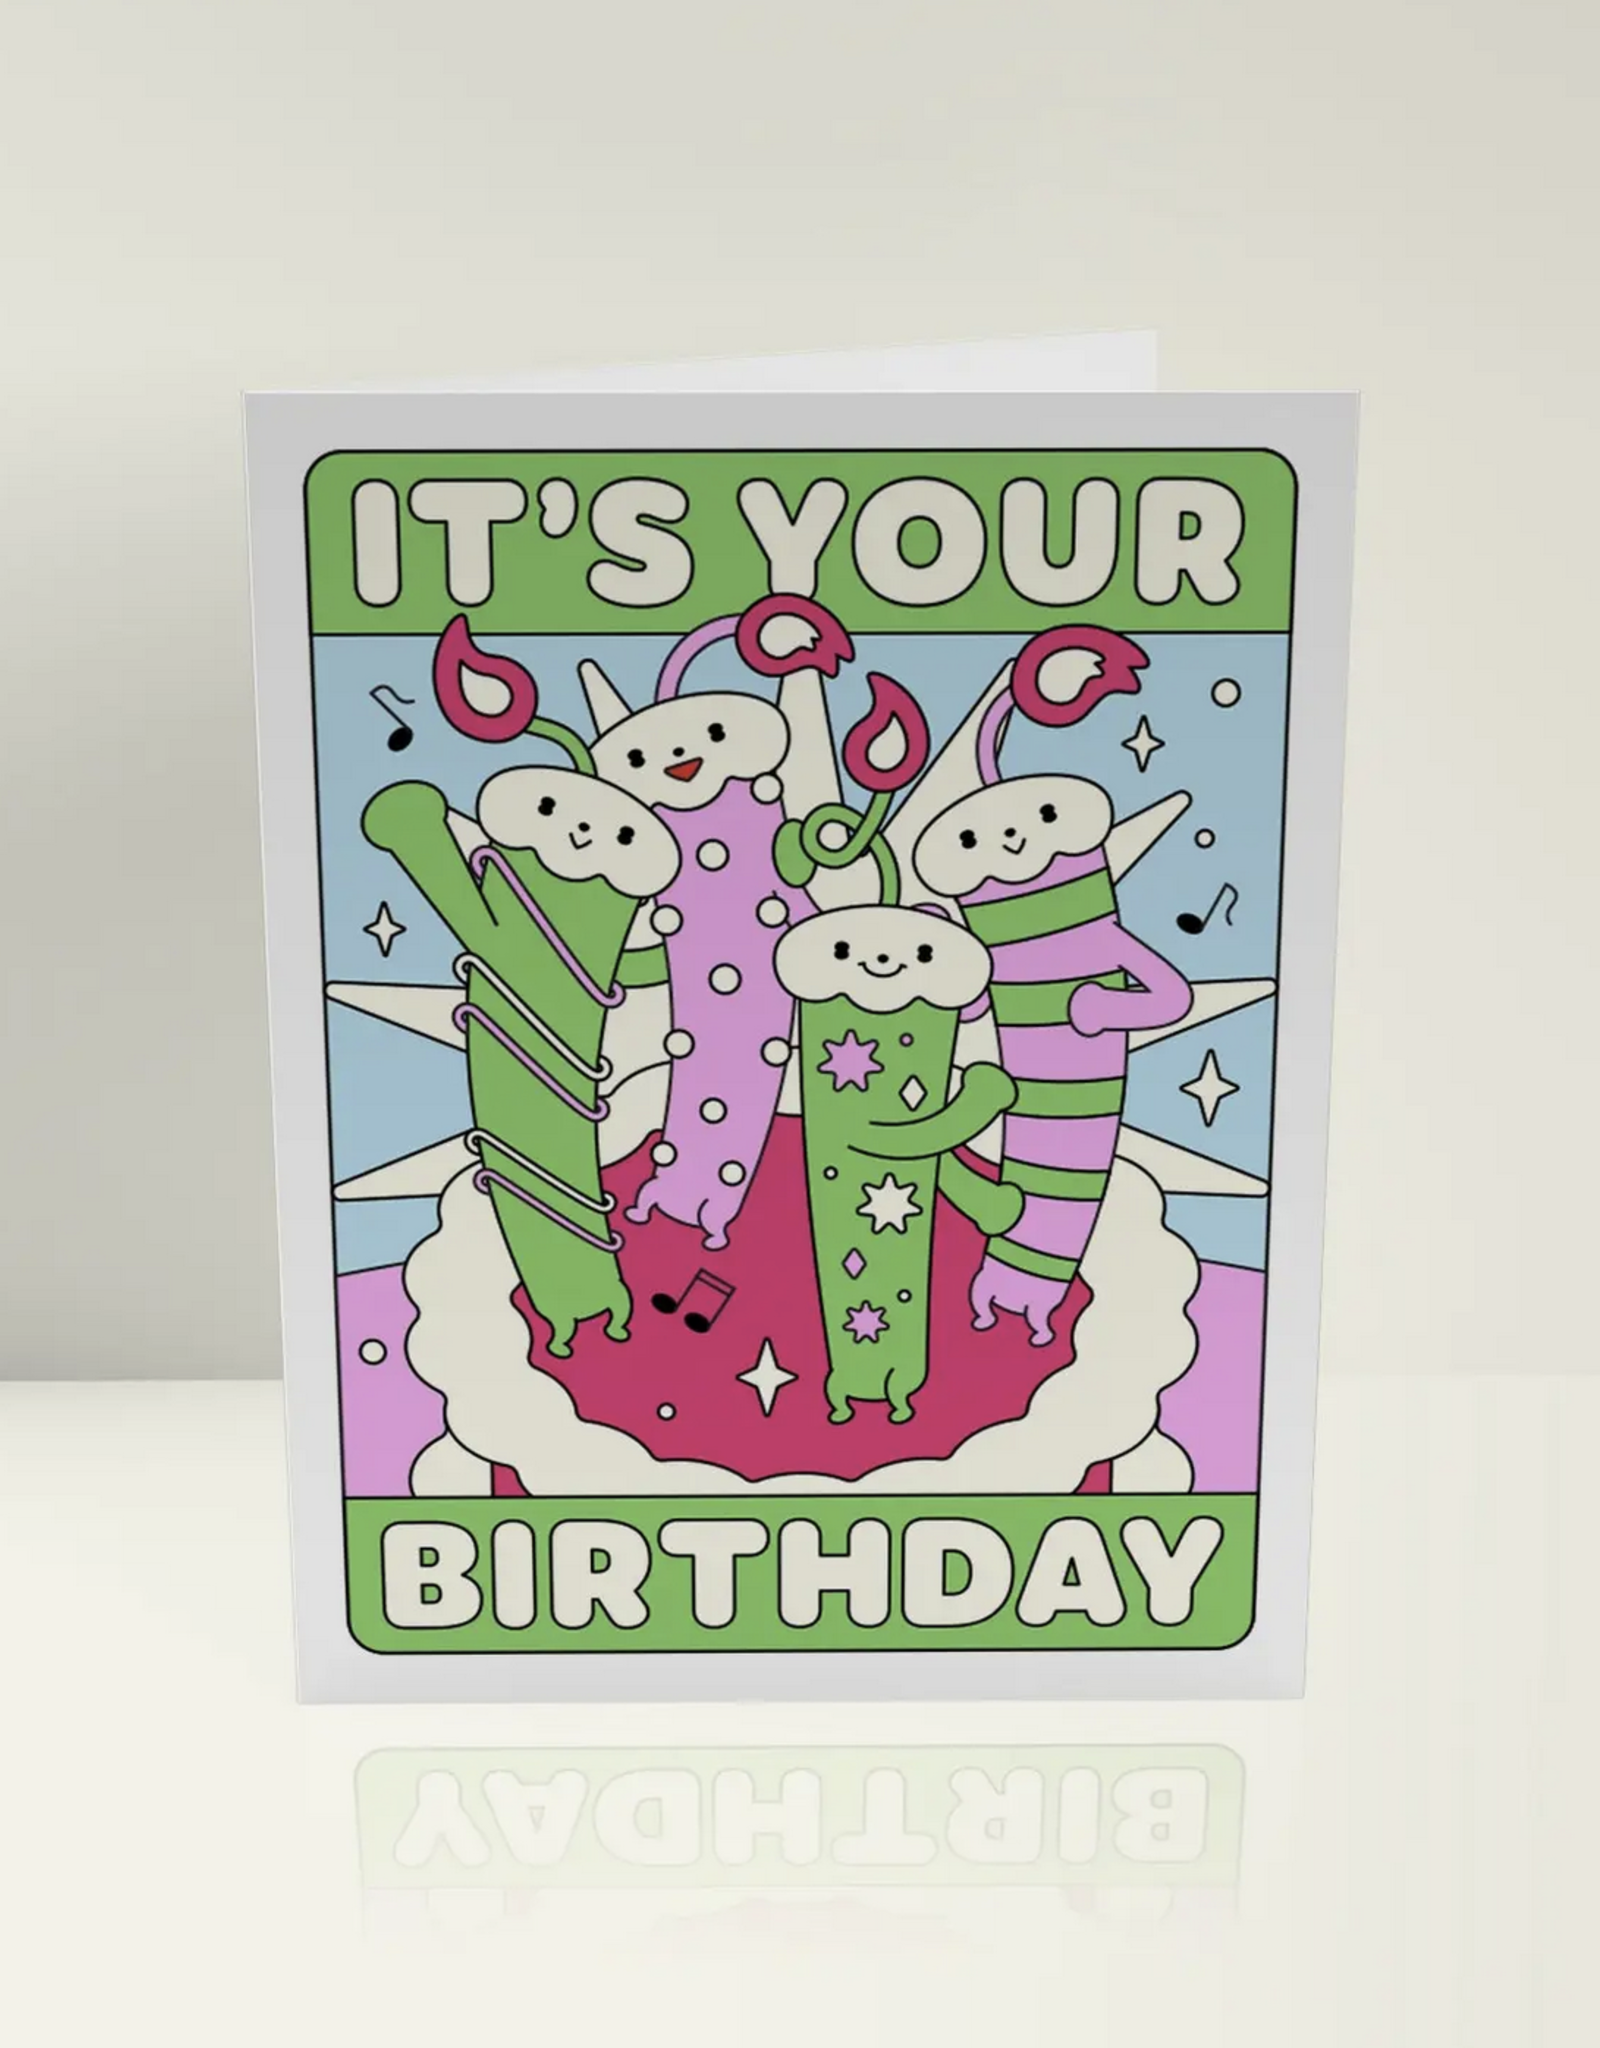 It's Your Birthday Candles Greeting Card